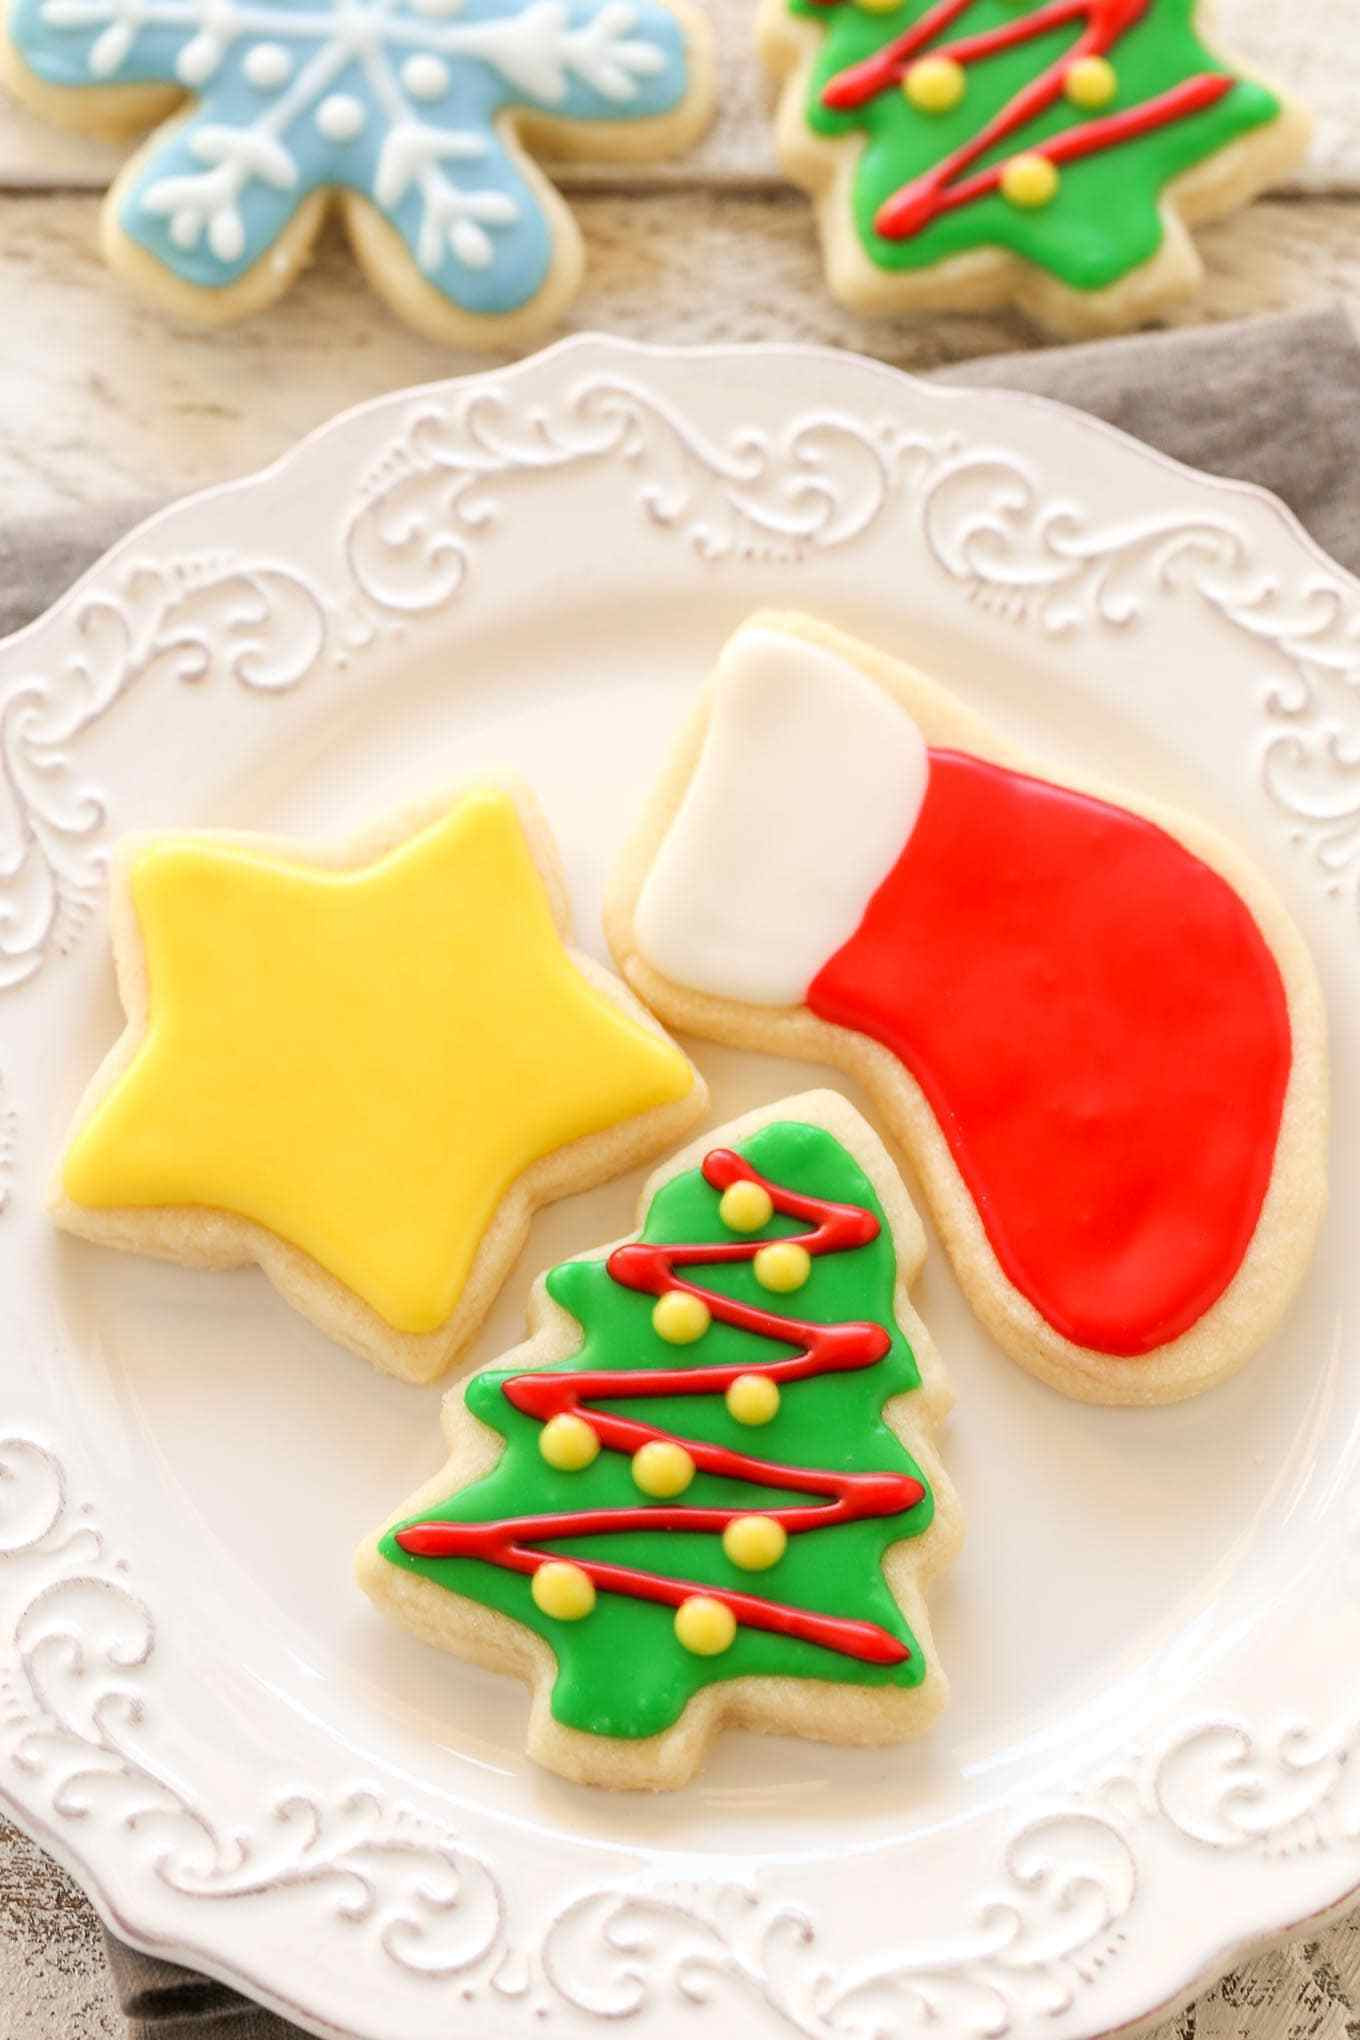 Christmas Cookies Cut Outs
 Soft Christmas Cut Out Sugar Cookies Live Well Bake ten